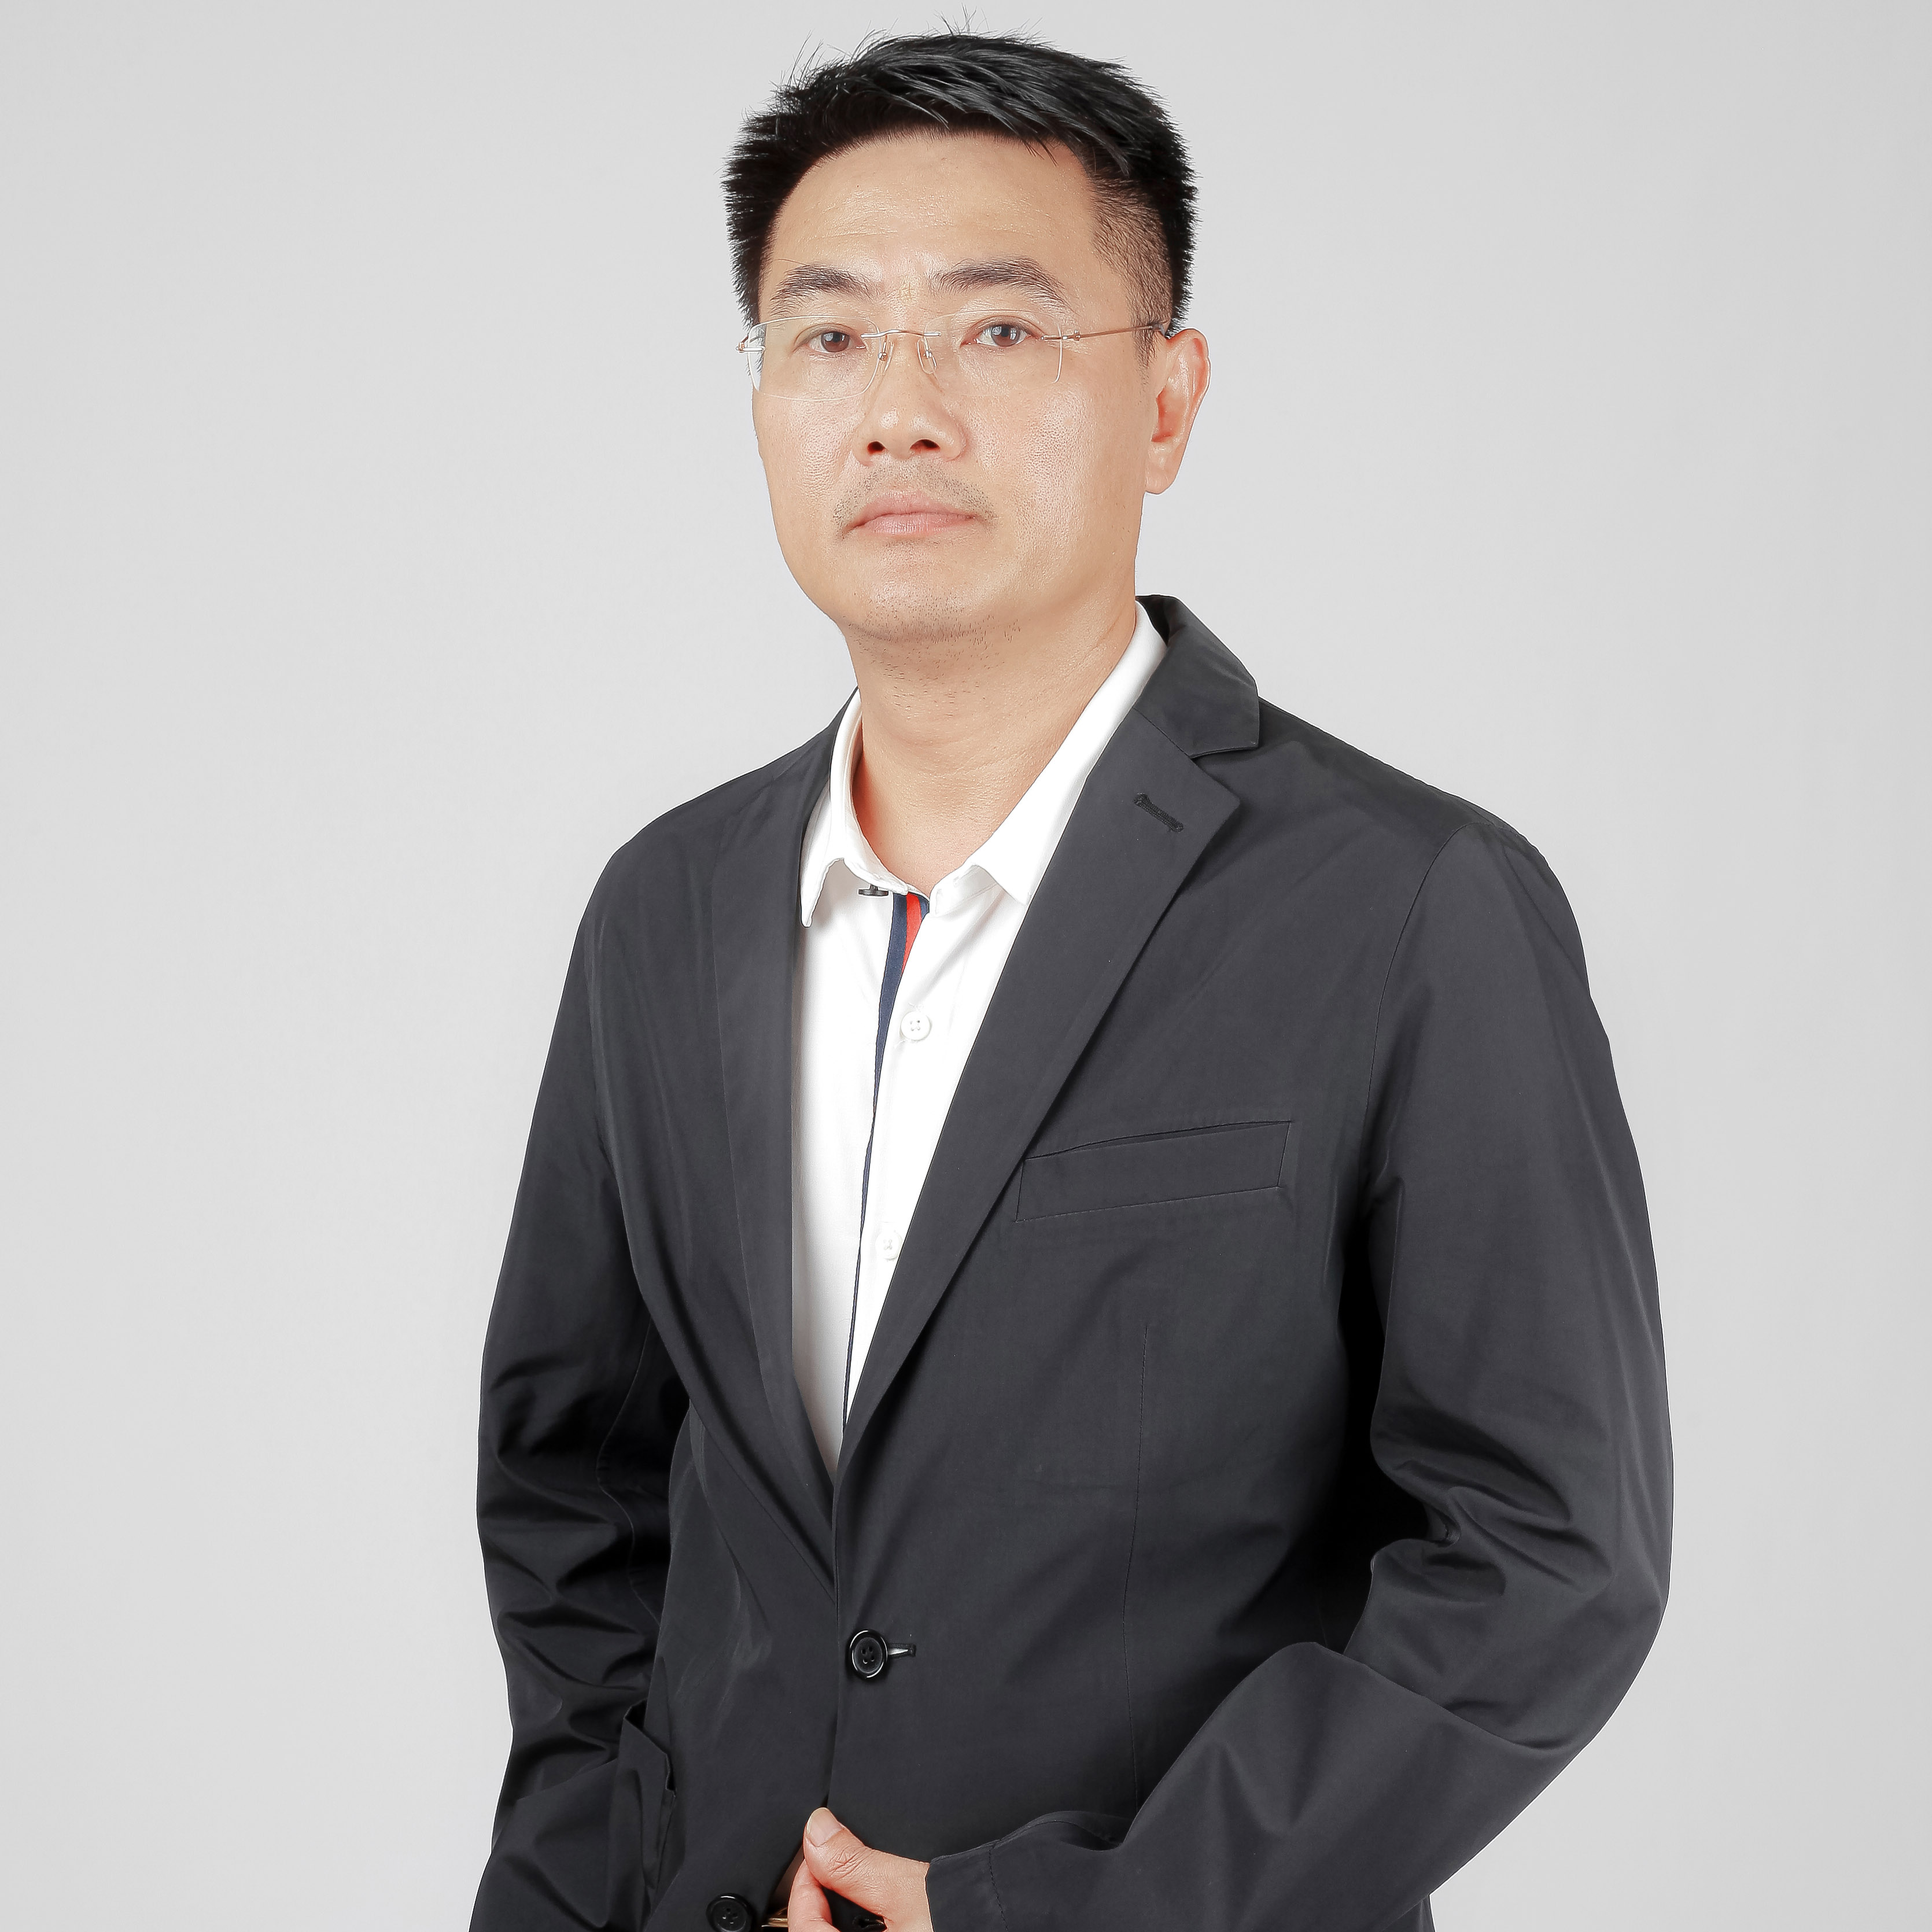 Mr. Hoang Anh Chien